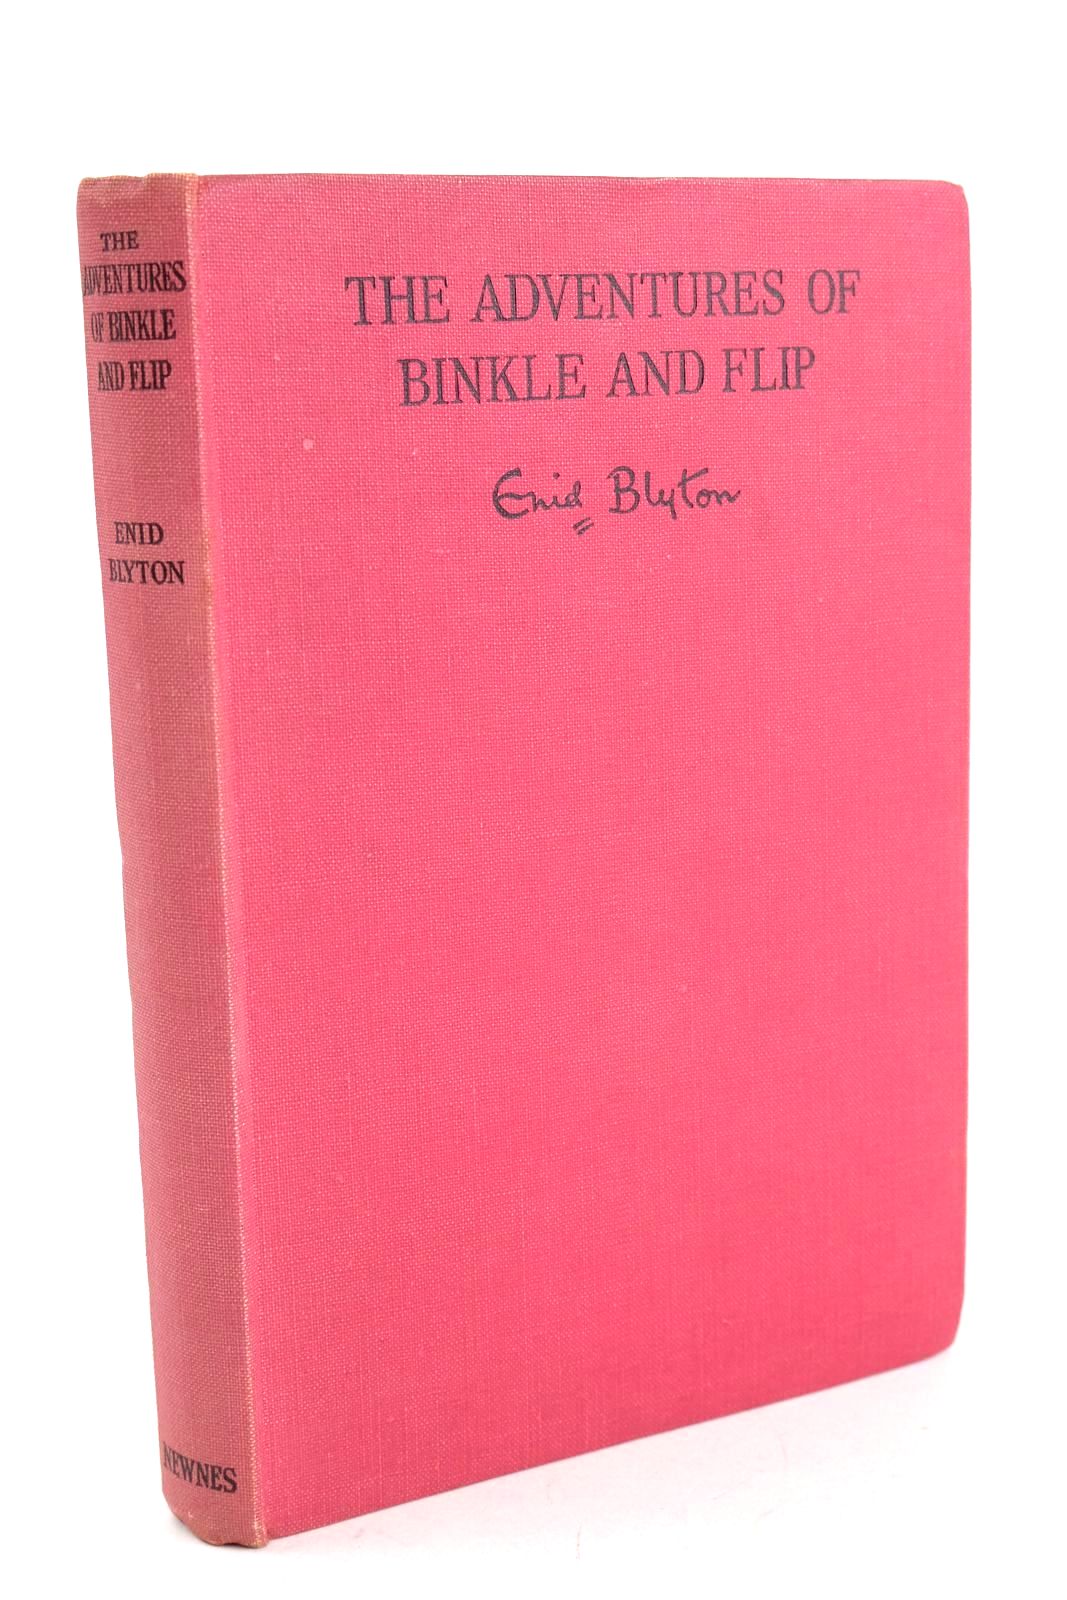 Photo of THE ADVENTURES OF BINKLE AND FLIP written by Blyton, Enid illustrated by Nixon, Kathleen published by George Newnes Limited (STOCK CODE: 1326755)  for sale by Stella & Rose's Books